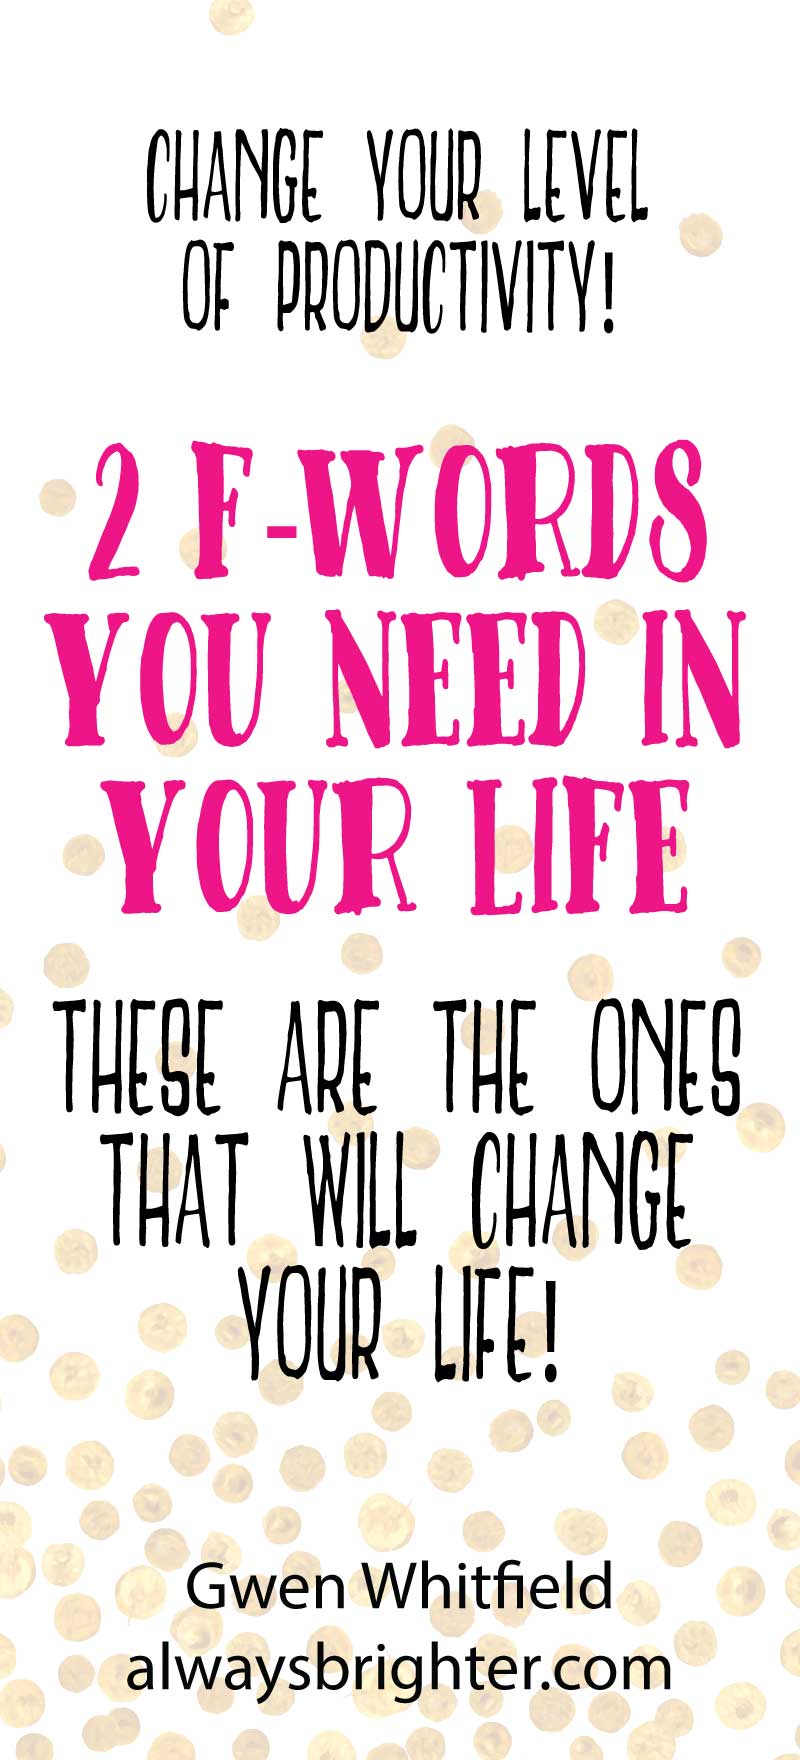 The Two F-Words You Need in Your Life: These 2 F-Words are a must have in your vocabulary! Use them to create a life of directed and sustained growth by increasing your productivity!